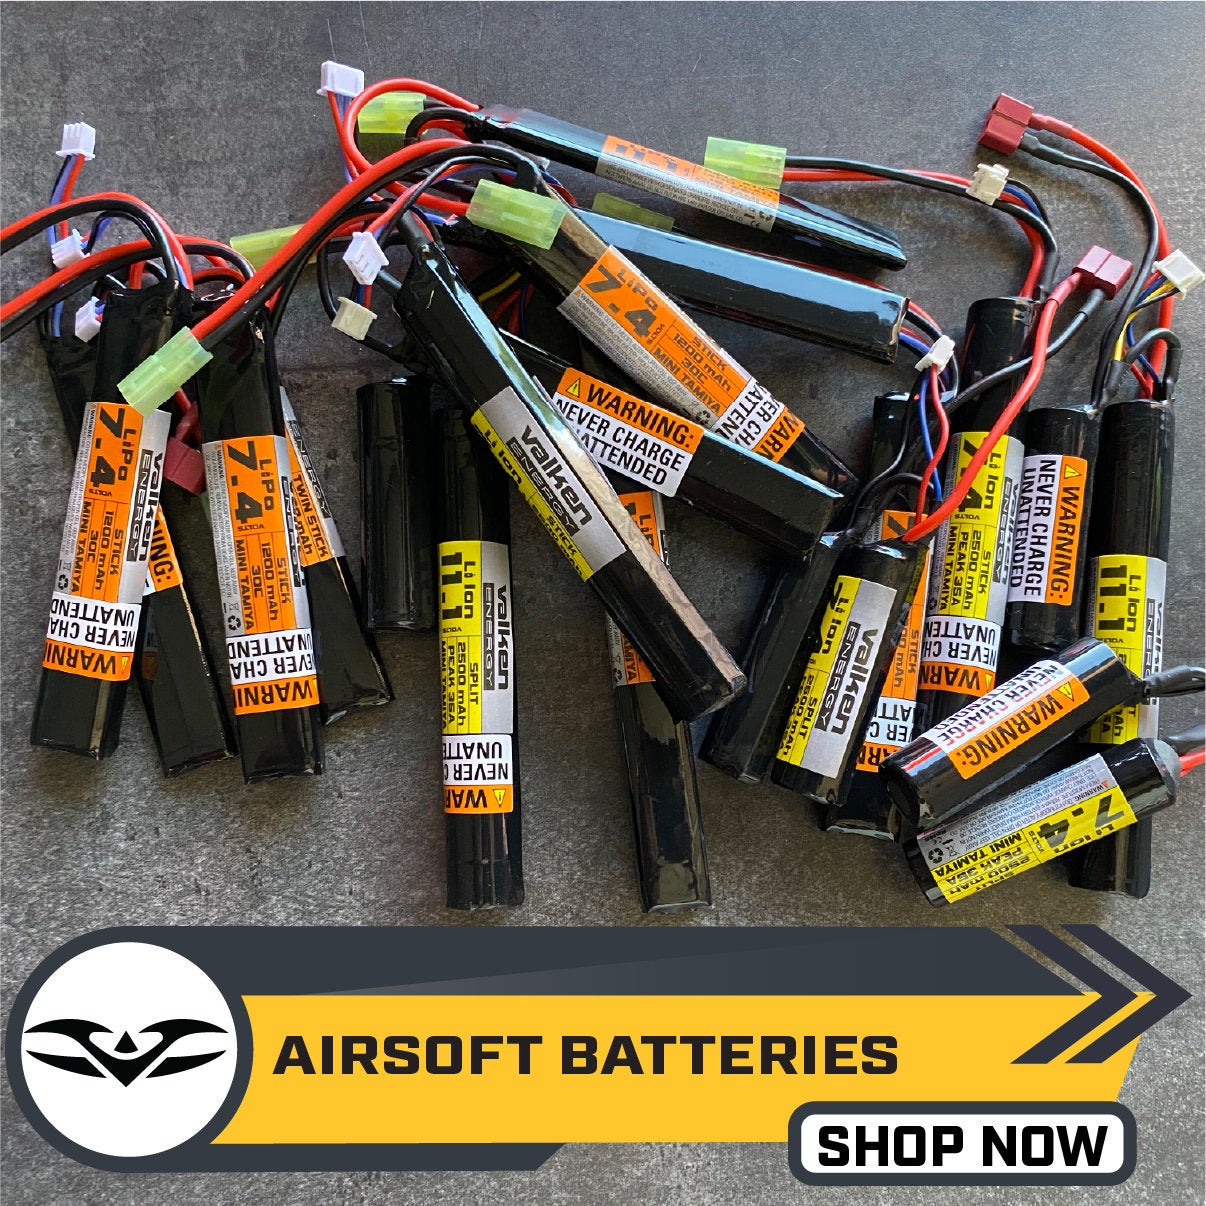 Gunfire Blog  What should you know about LiPo batteries for airsoft  replicas?